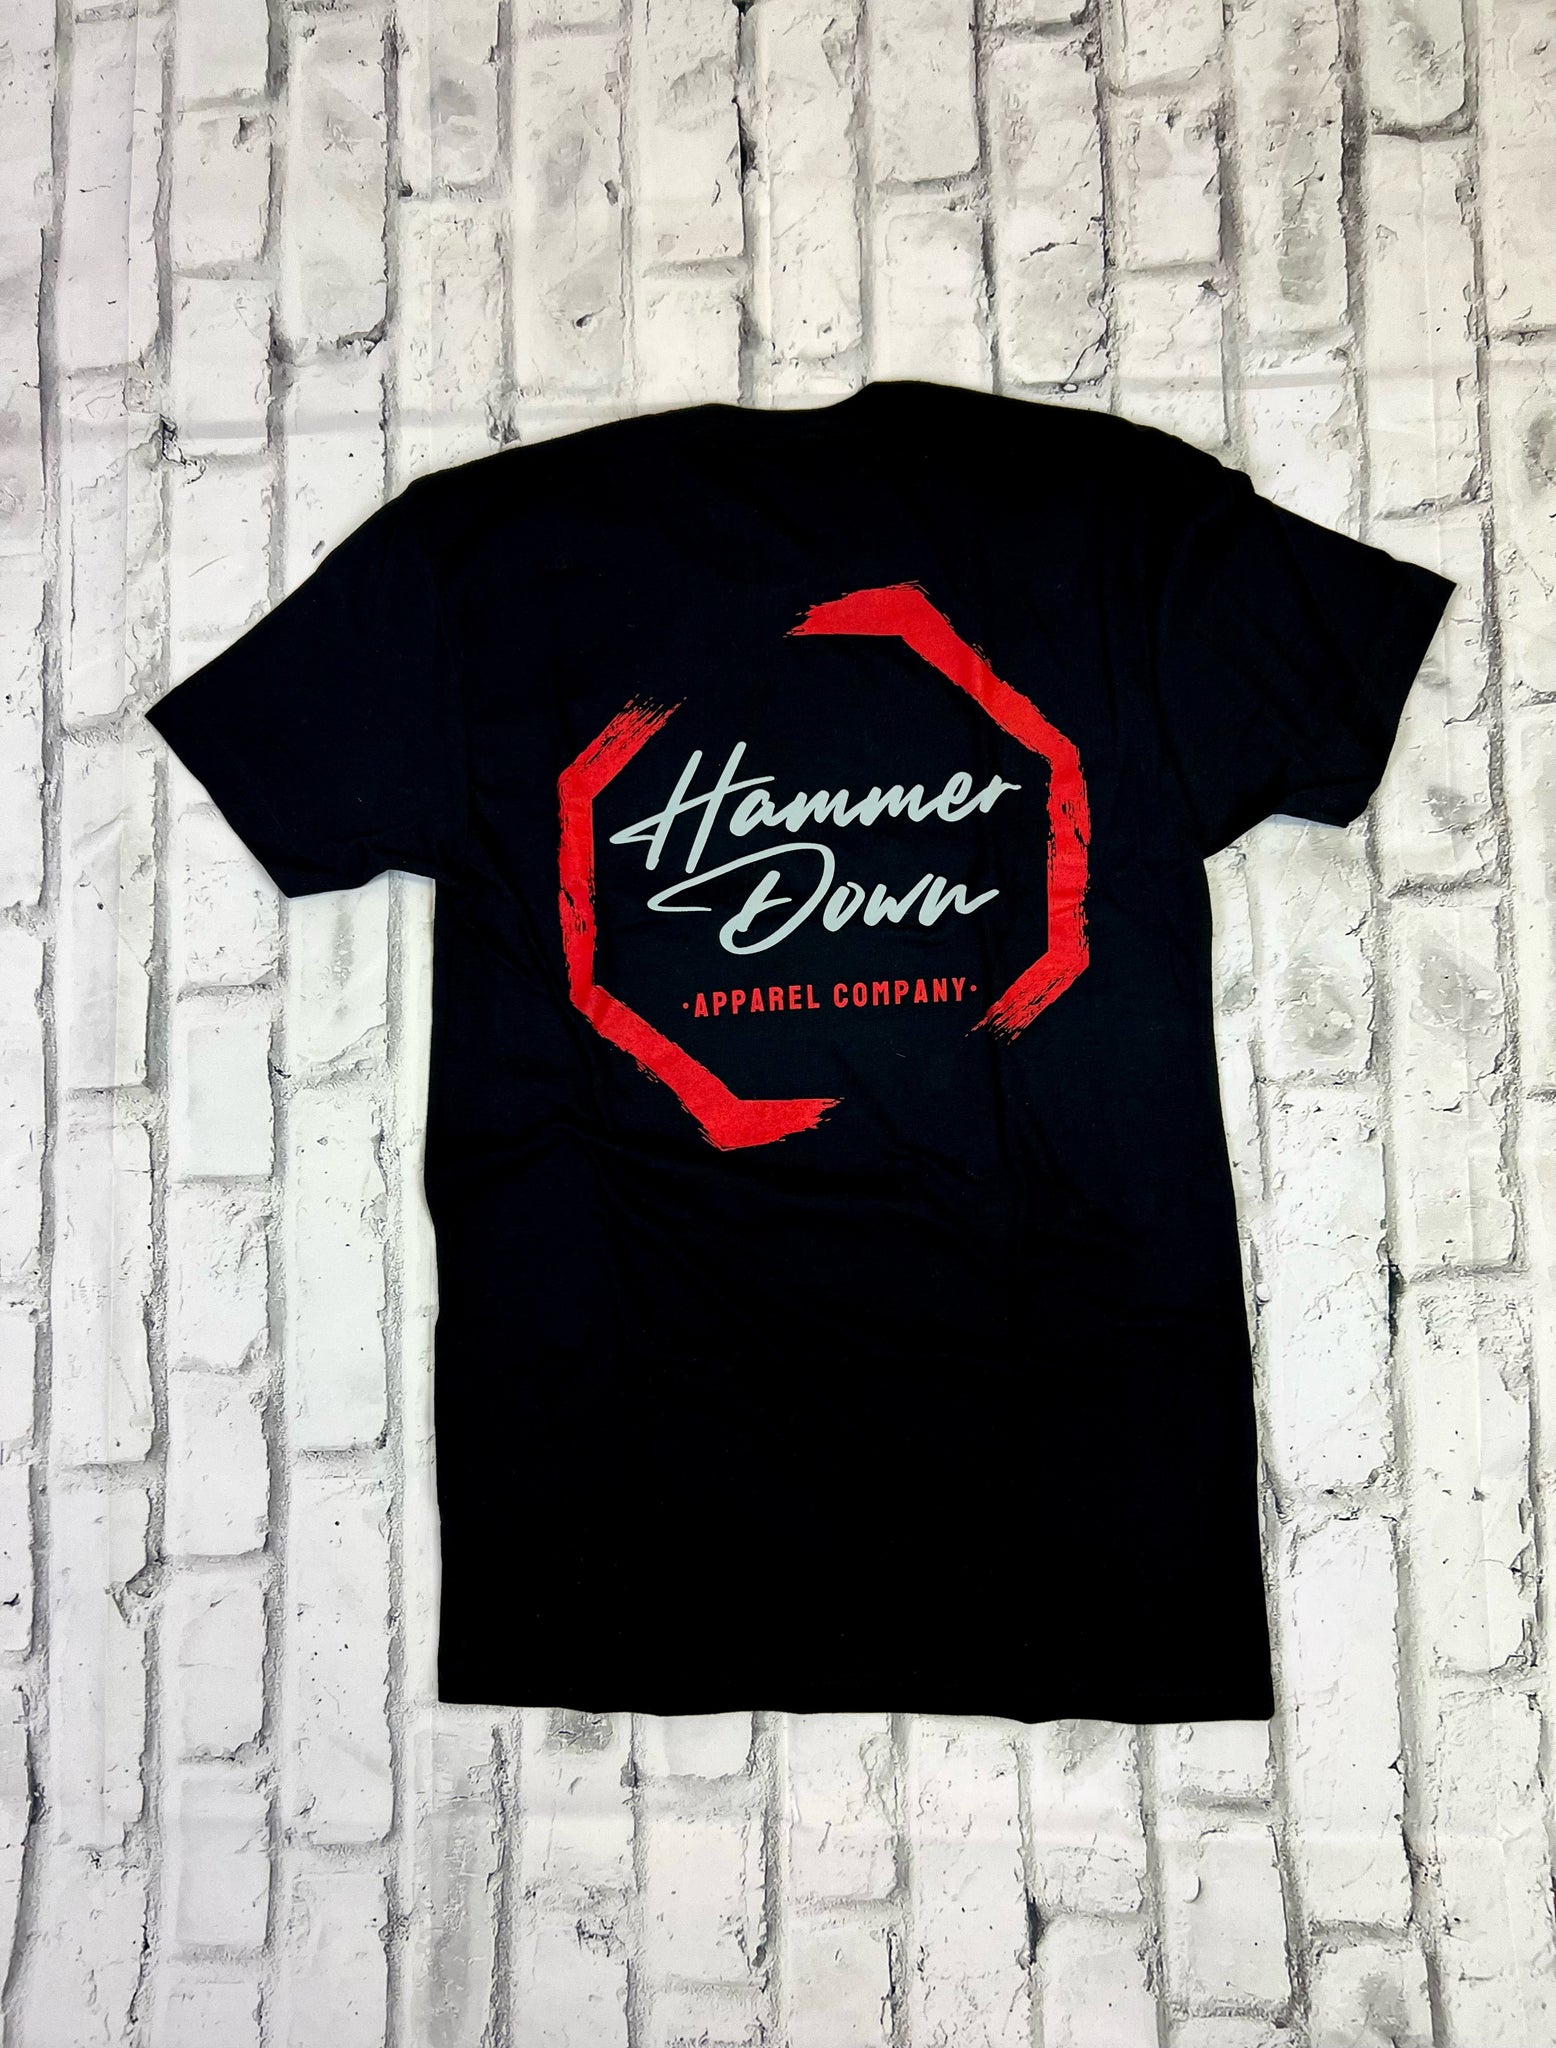 Hammer Down "Black and Red Paint Octagon" Short Sleeve T-shirt - Black - Southern Charm "Shop The Charm"